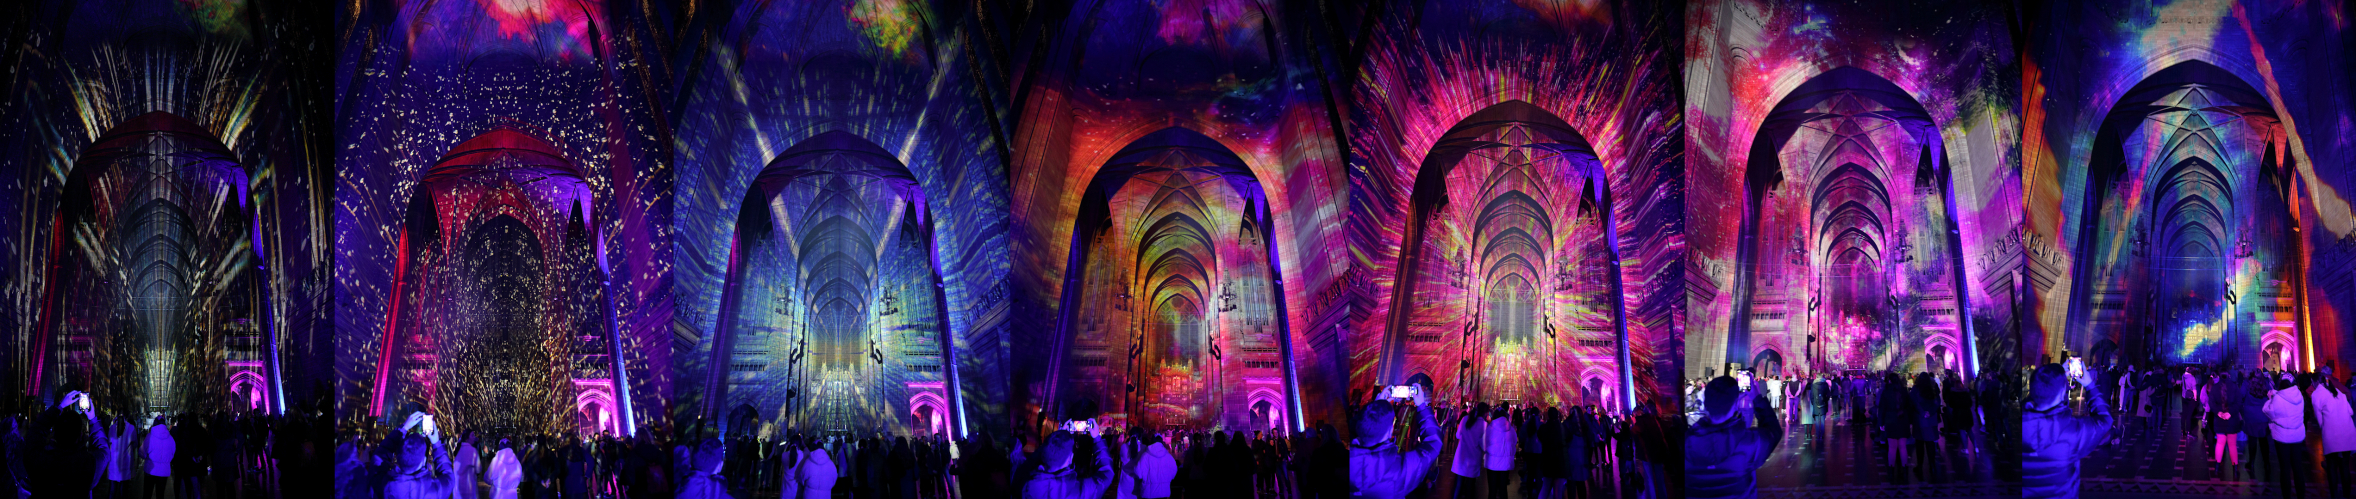 Space, The Universe and Everything.
The Liverpool Anglican cathedral regularly hosts events and recently they had this big light show which used massive projectors to project moving images onto the walls and roof of the cathedral along with a spacey soundtrack.
The idea was as you walked through the different area of the building there was all sorts of different themes regarding human space travel and the universe itself in the main hall. It was quite impressive tbh.
